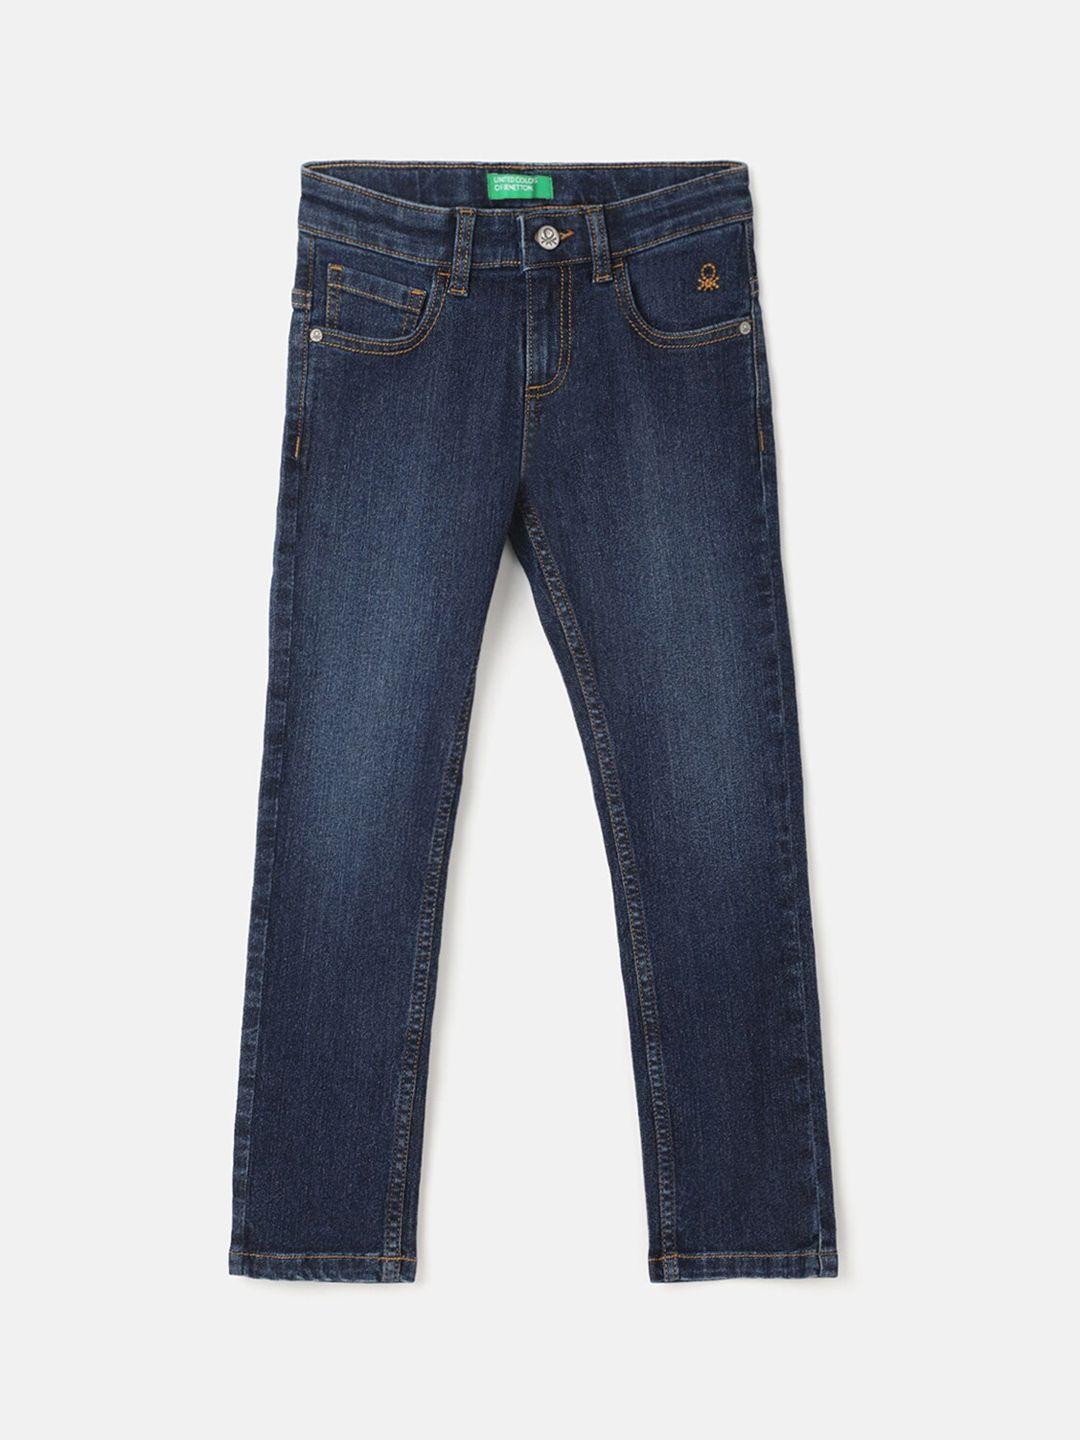 united colors of benetton boys mid-rise clean look slim fit light fade jeans